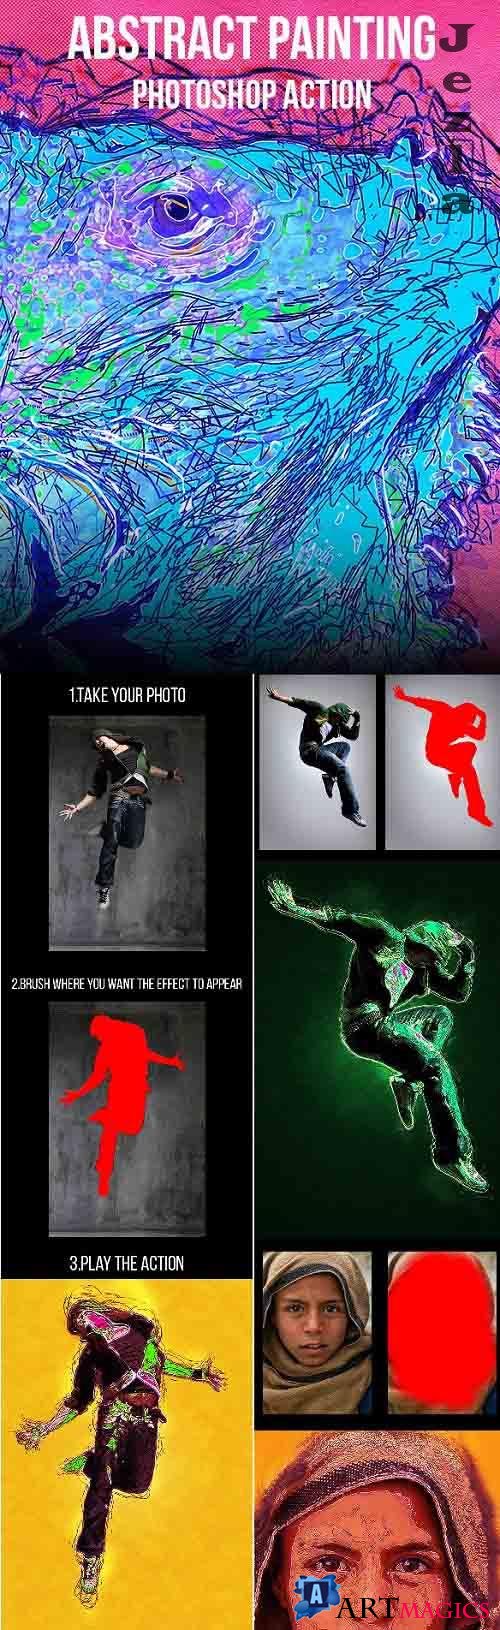 Abstract Painting Photoshop Action 11067430